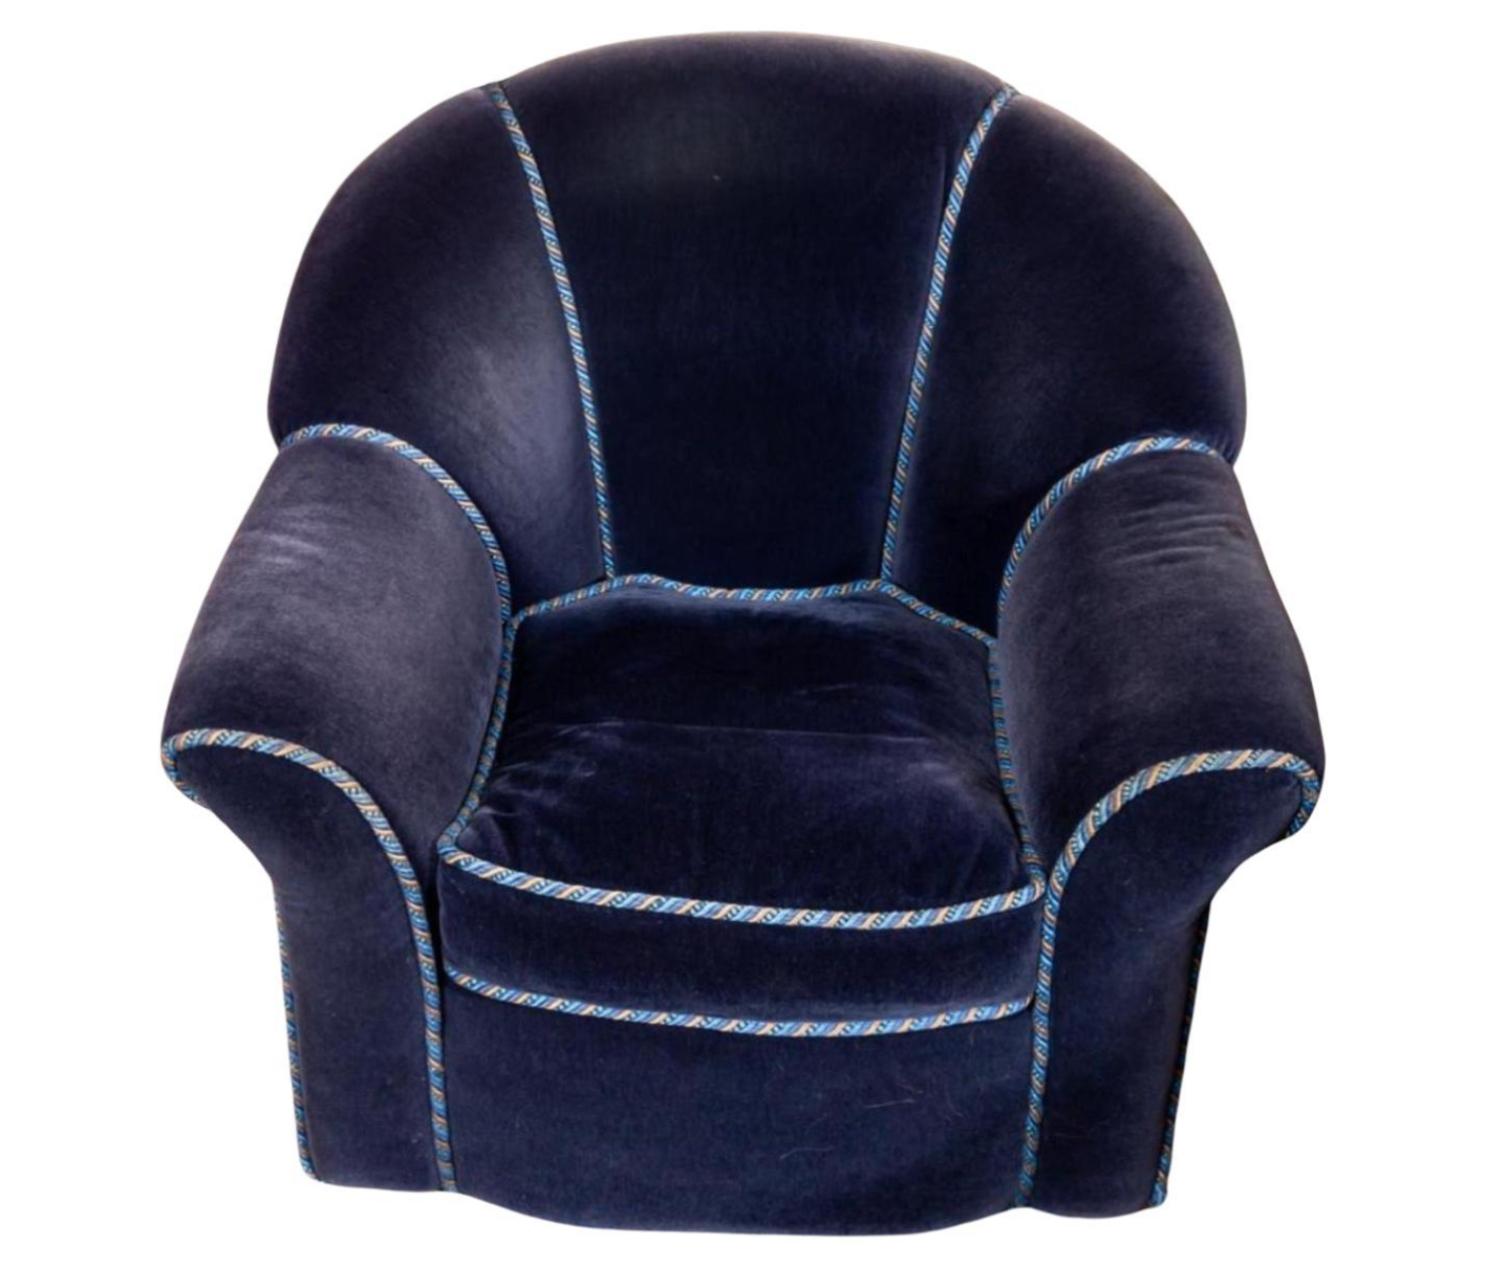 Pair of Art Deco Style Fully Upholstered Sapphire Blue Velvet Club Chairs In Good Condition For Sale In LOS ANGELES, CA